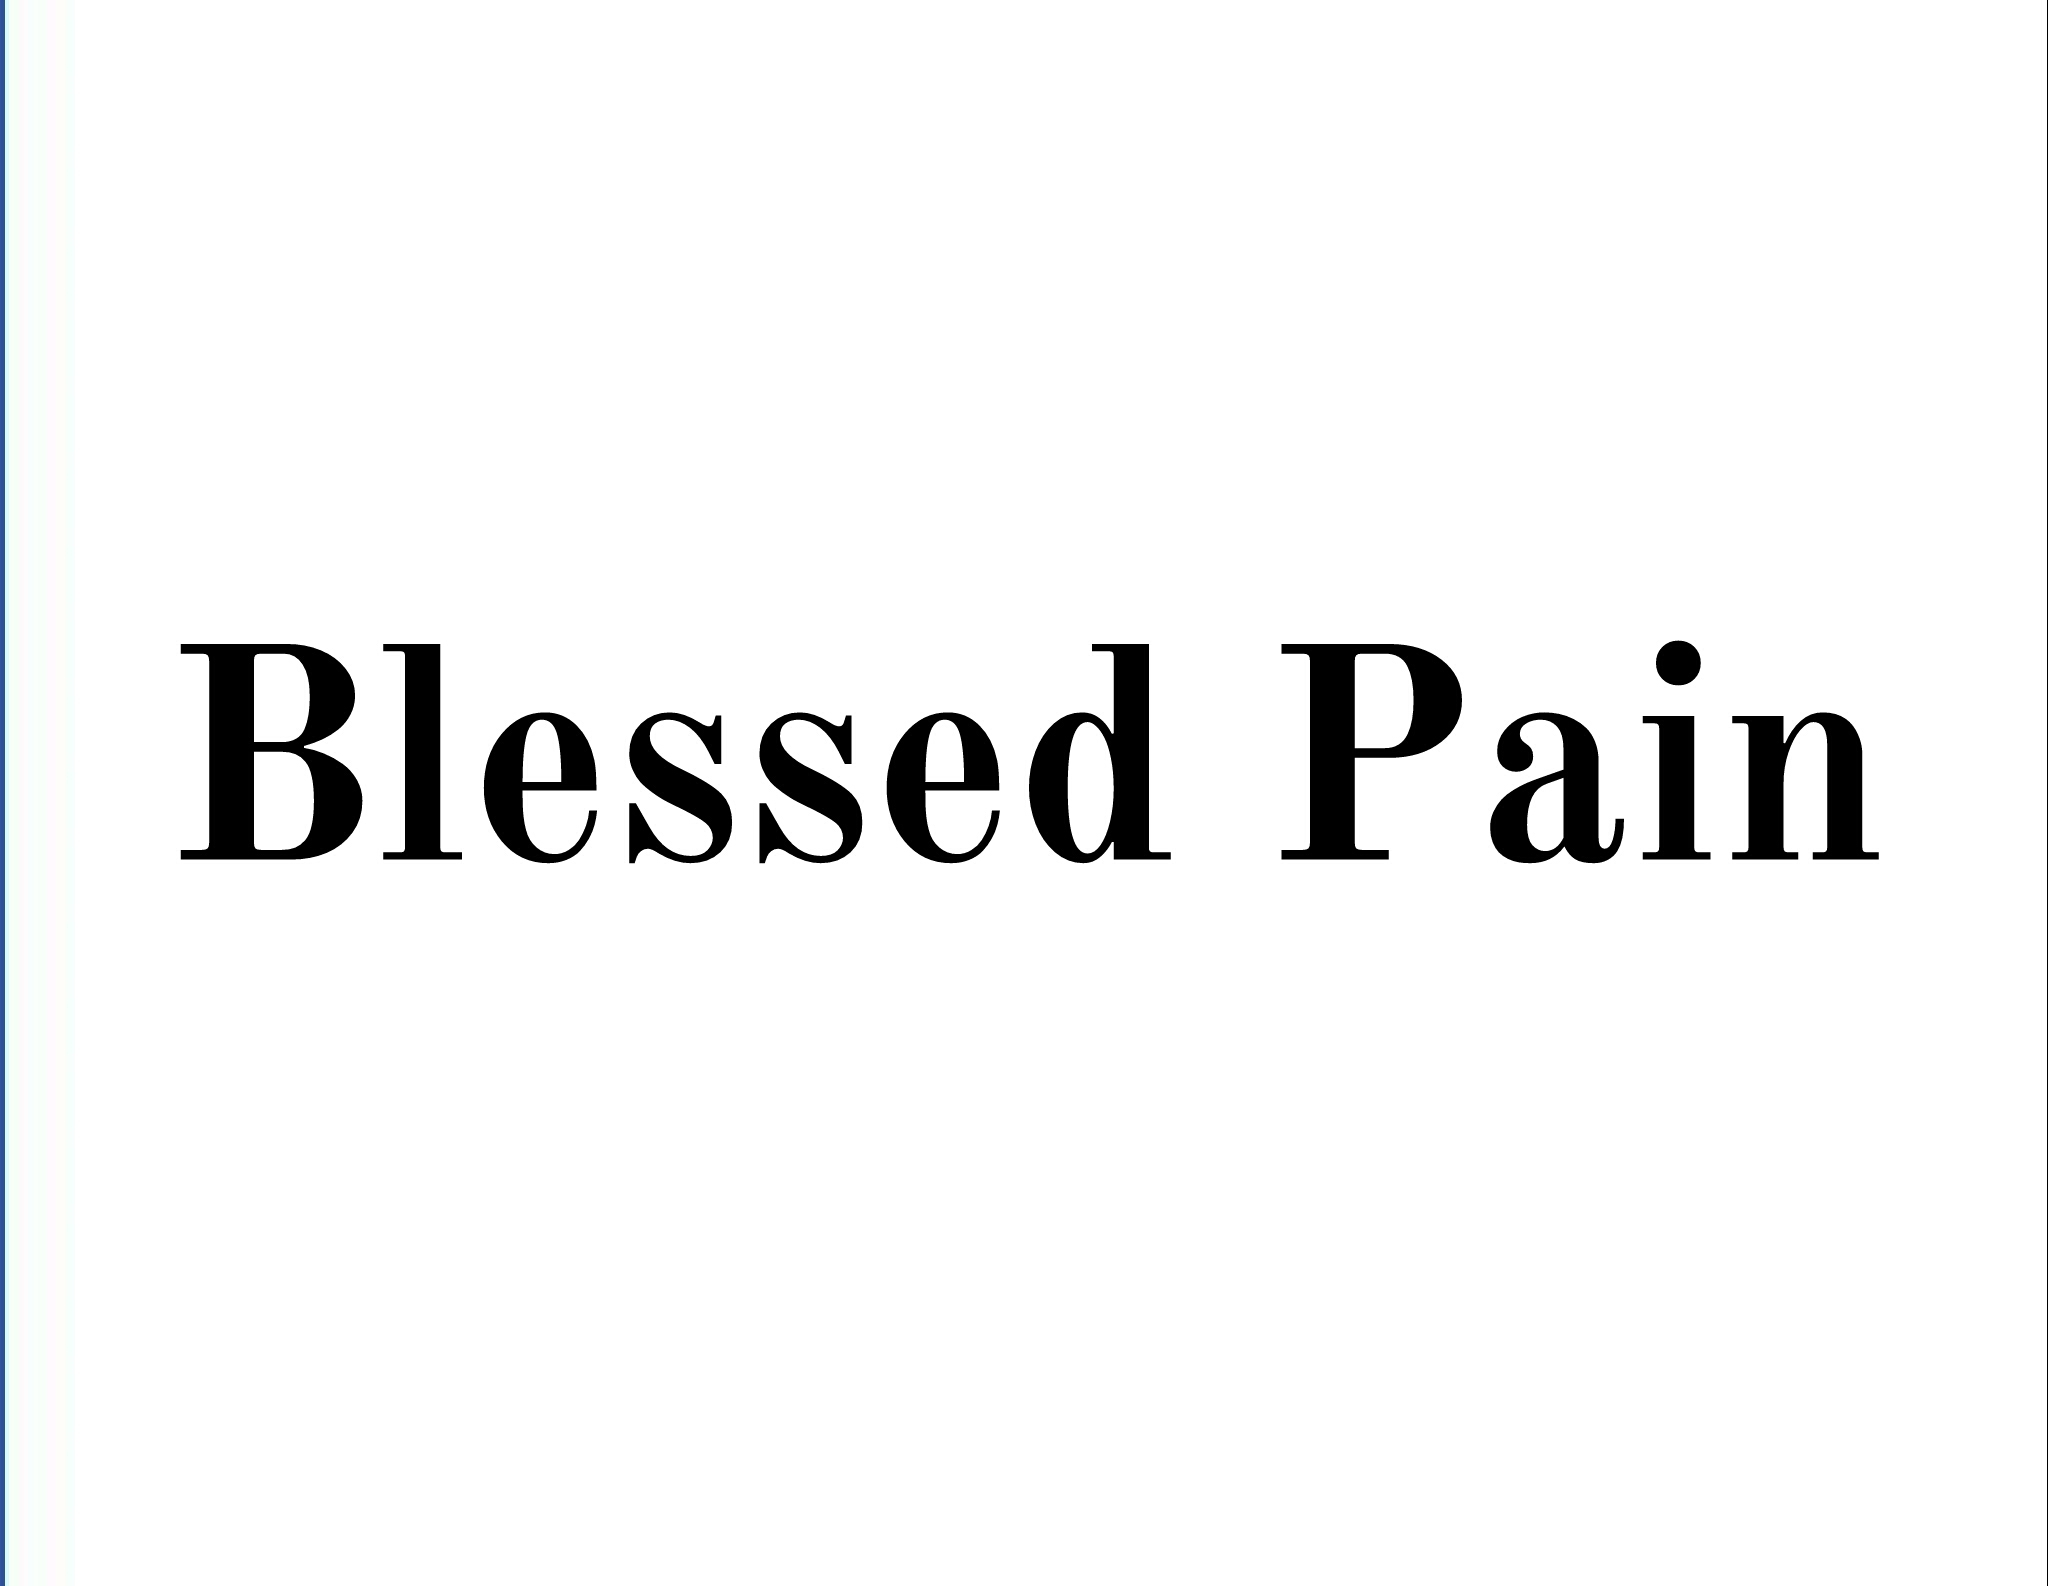 Blessed Pain